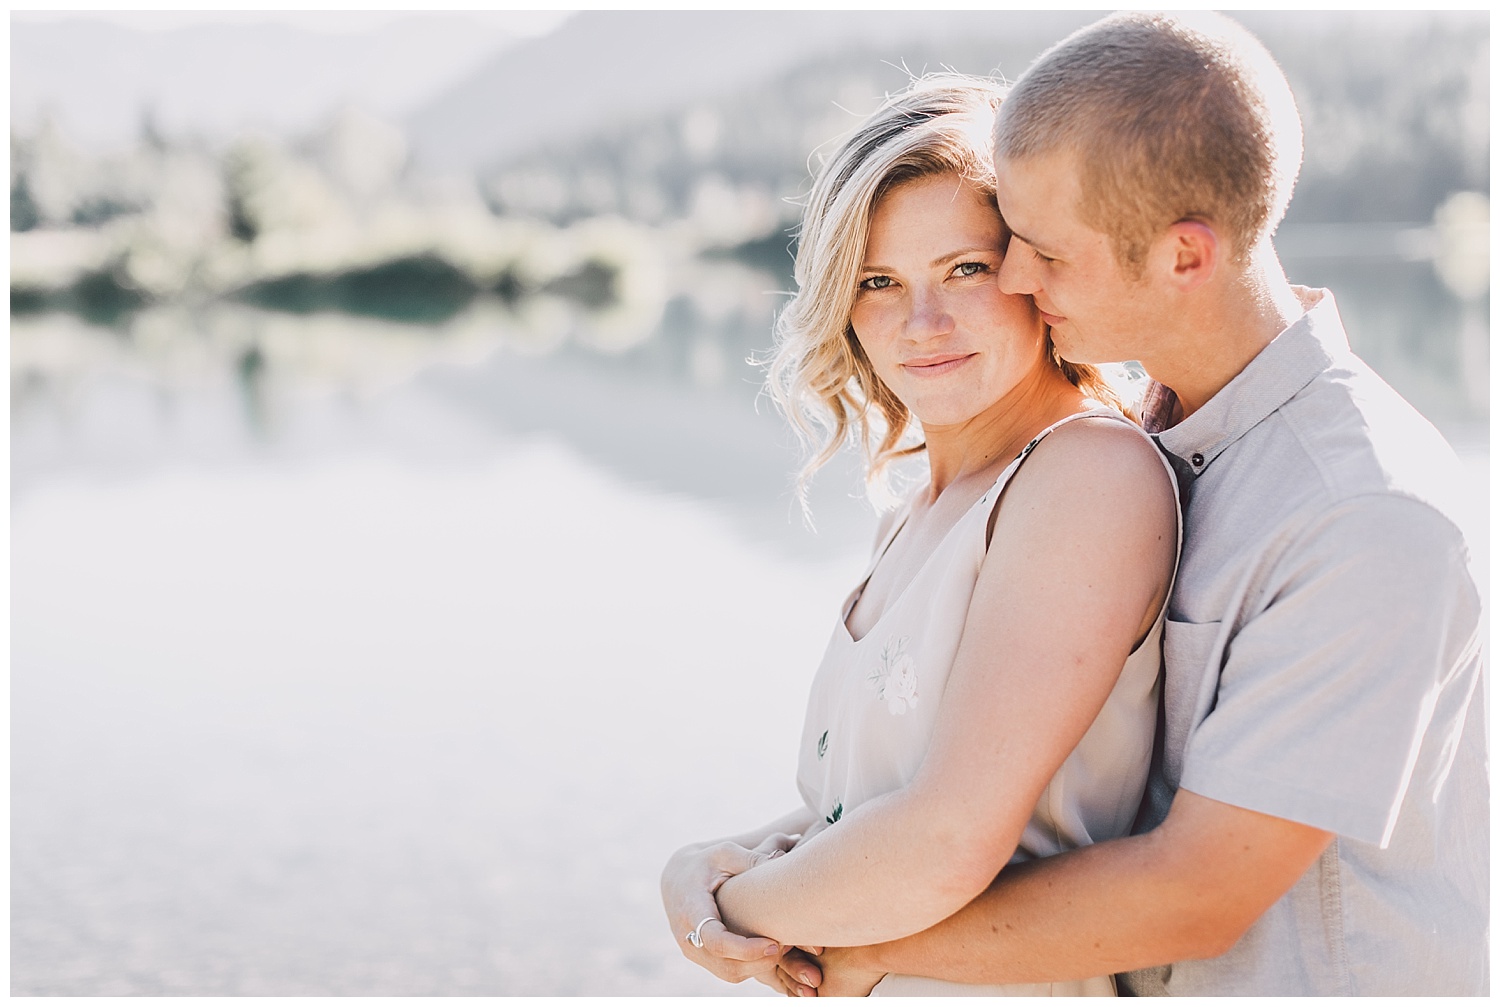 Gold Creek Pond engagement session by Kyle Goldie at Luma Weddings